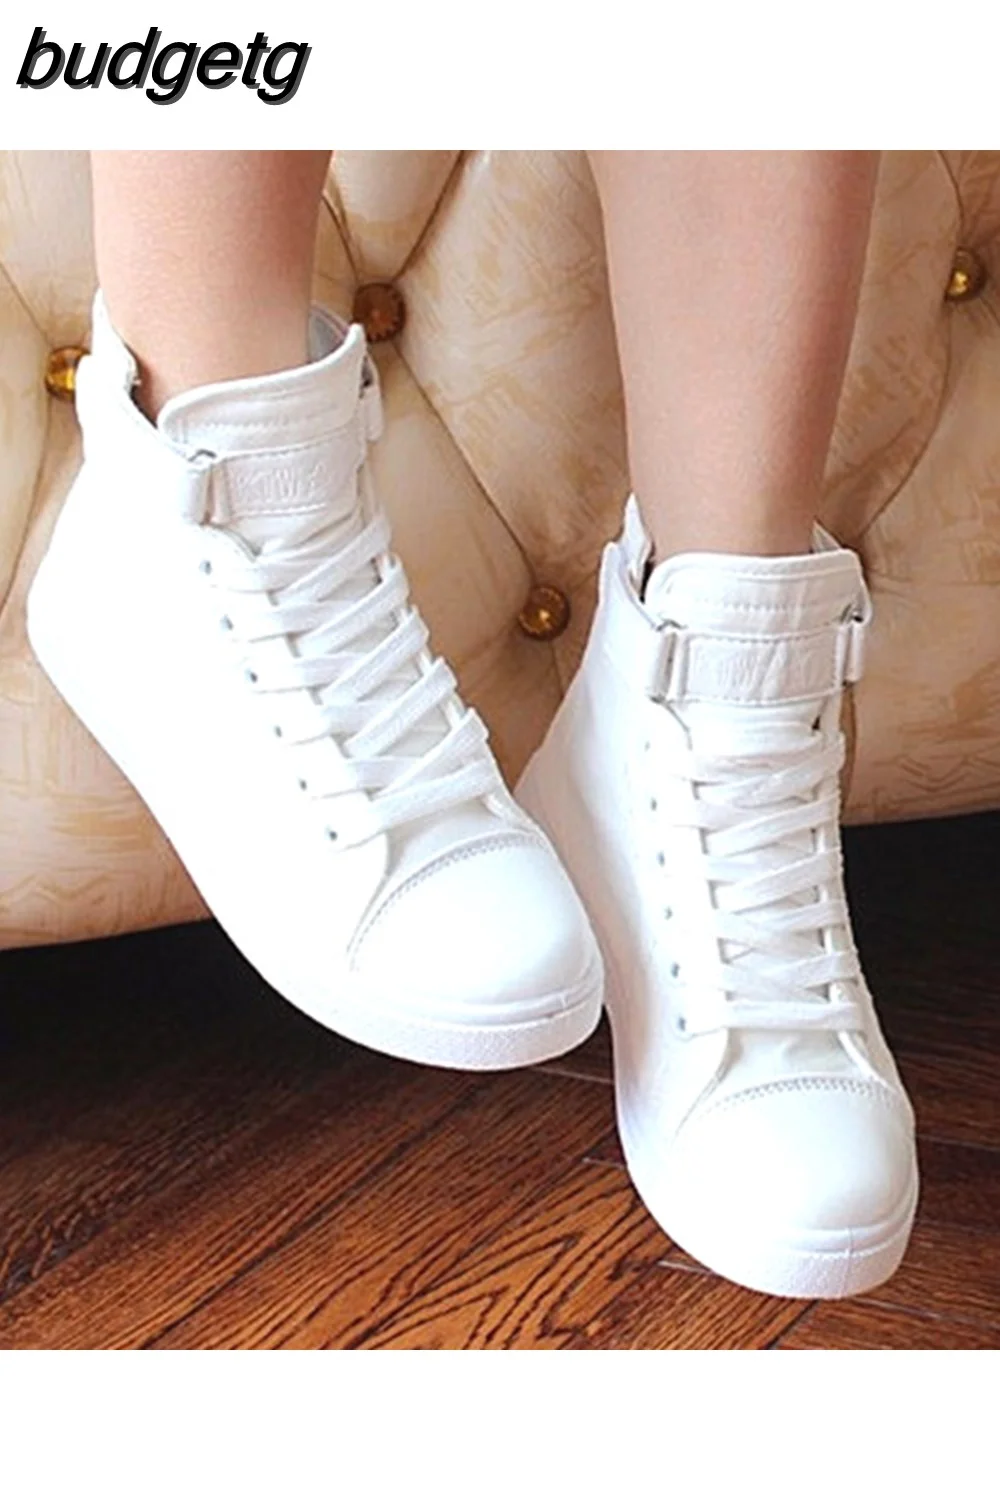 budgetg Top Sneakers Women Vulcanize Shoes Basket Femme White Canvas Shoes Woman Lace Up Trainers Women Tenis Feminino Casual